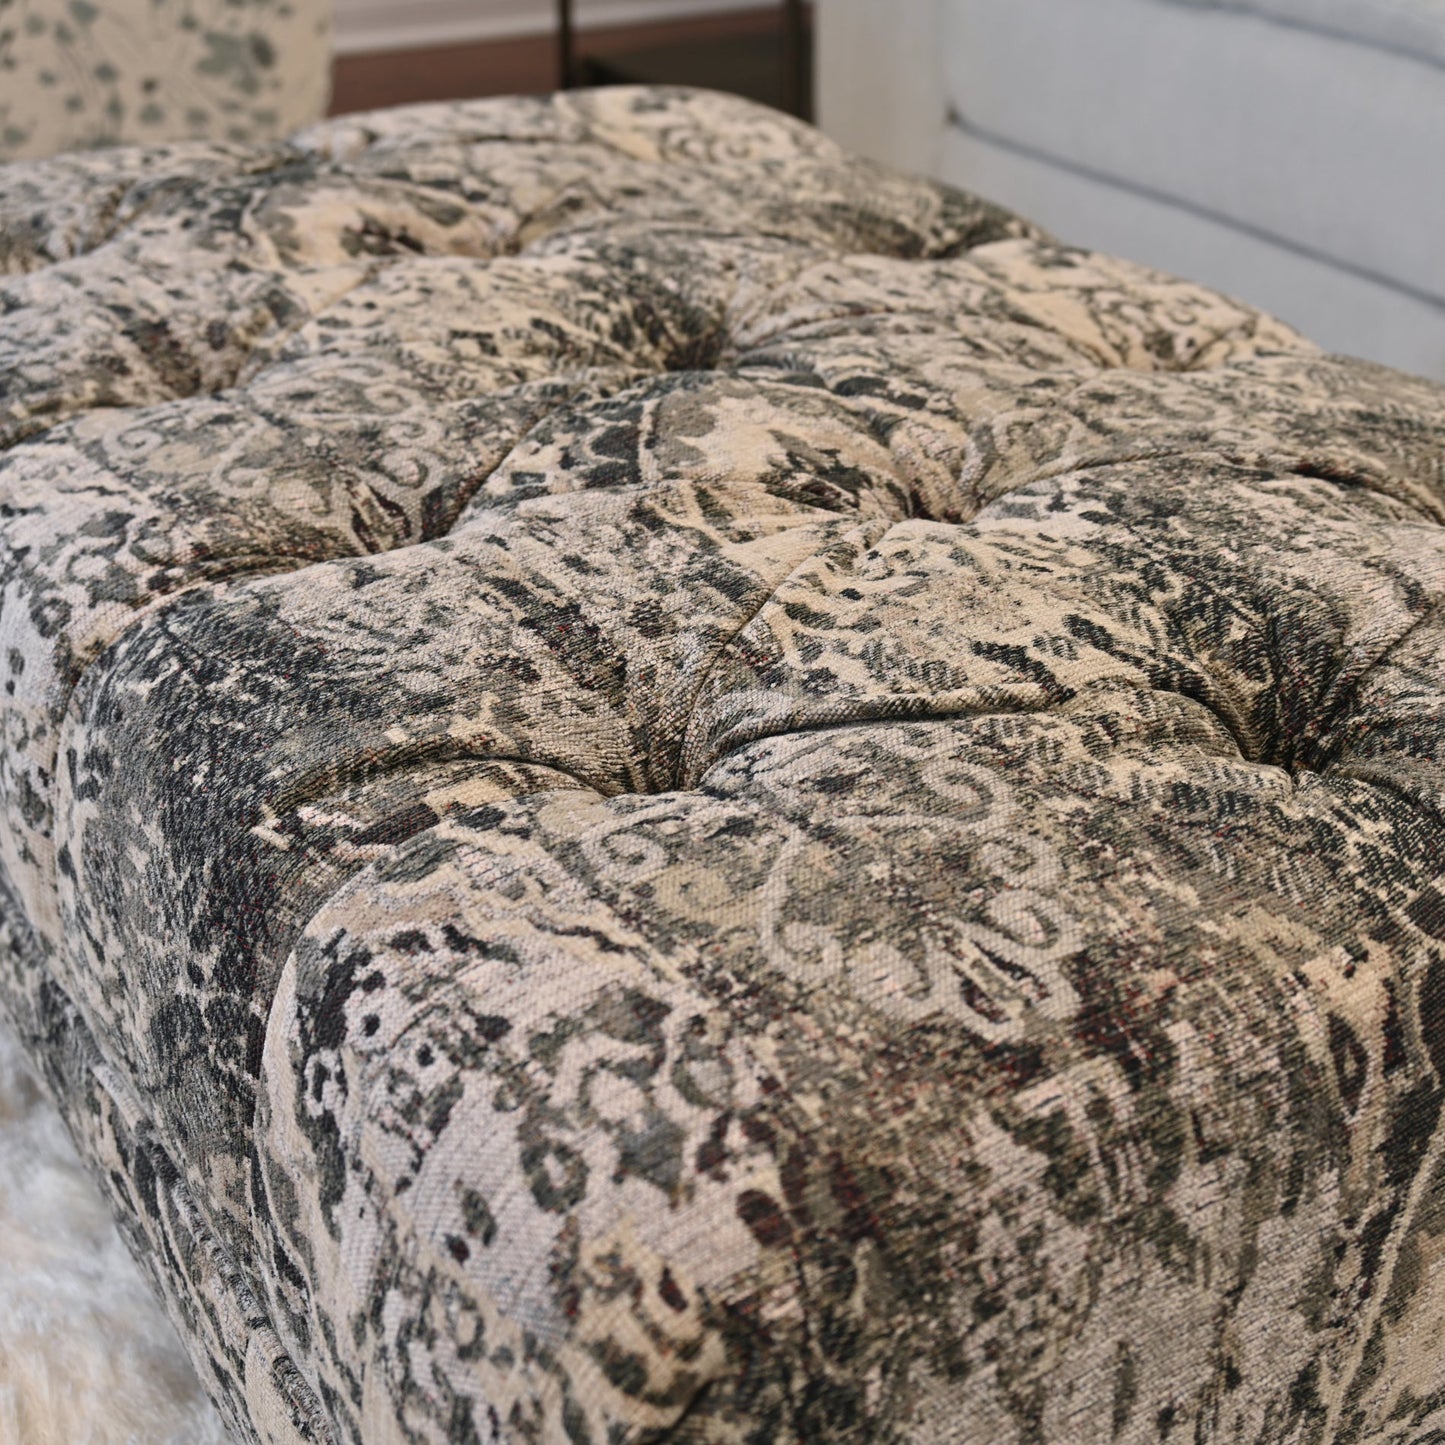 Roundhill Furniture Berliton Fabric Tufted Oversized Ottoman in Turkish Charcoal